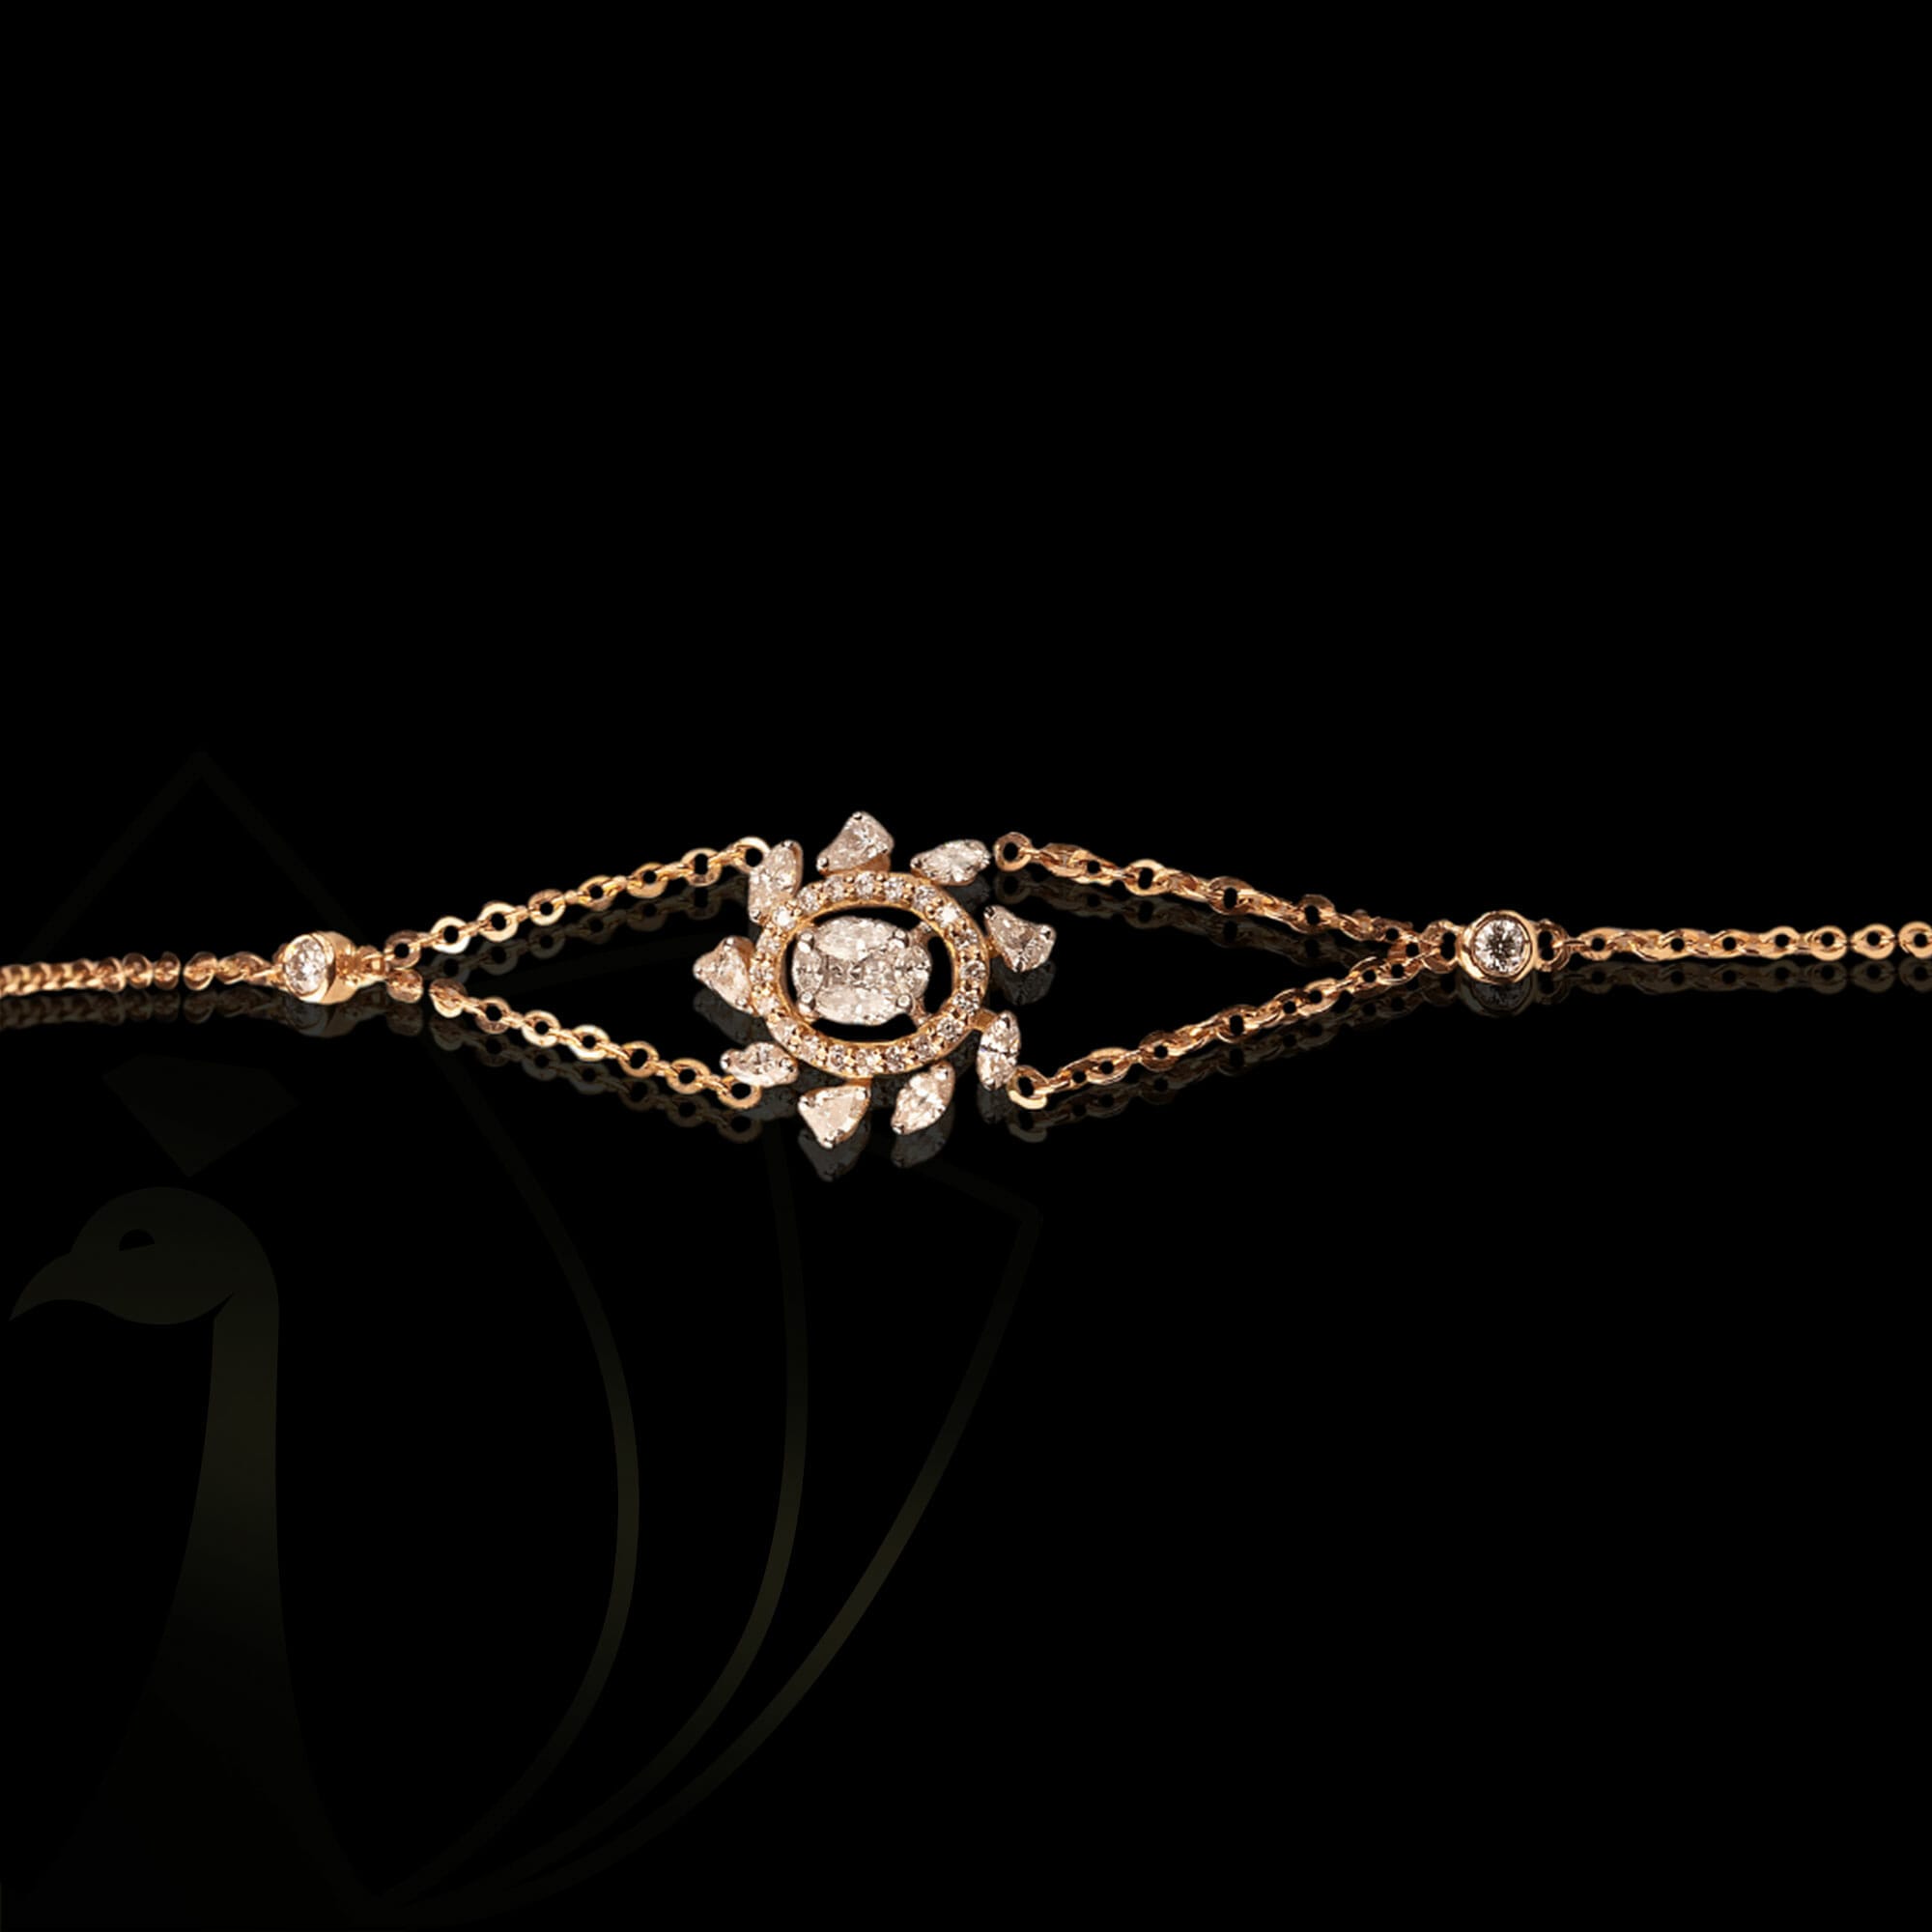 Sunflower Dazzle Diamond Bracelet from our exclusive Gulz Collection